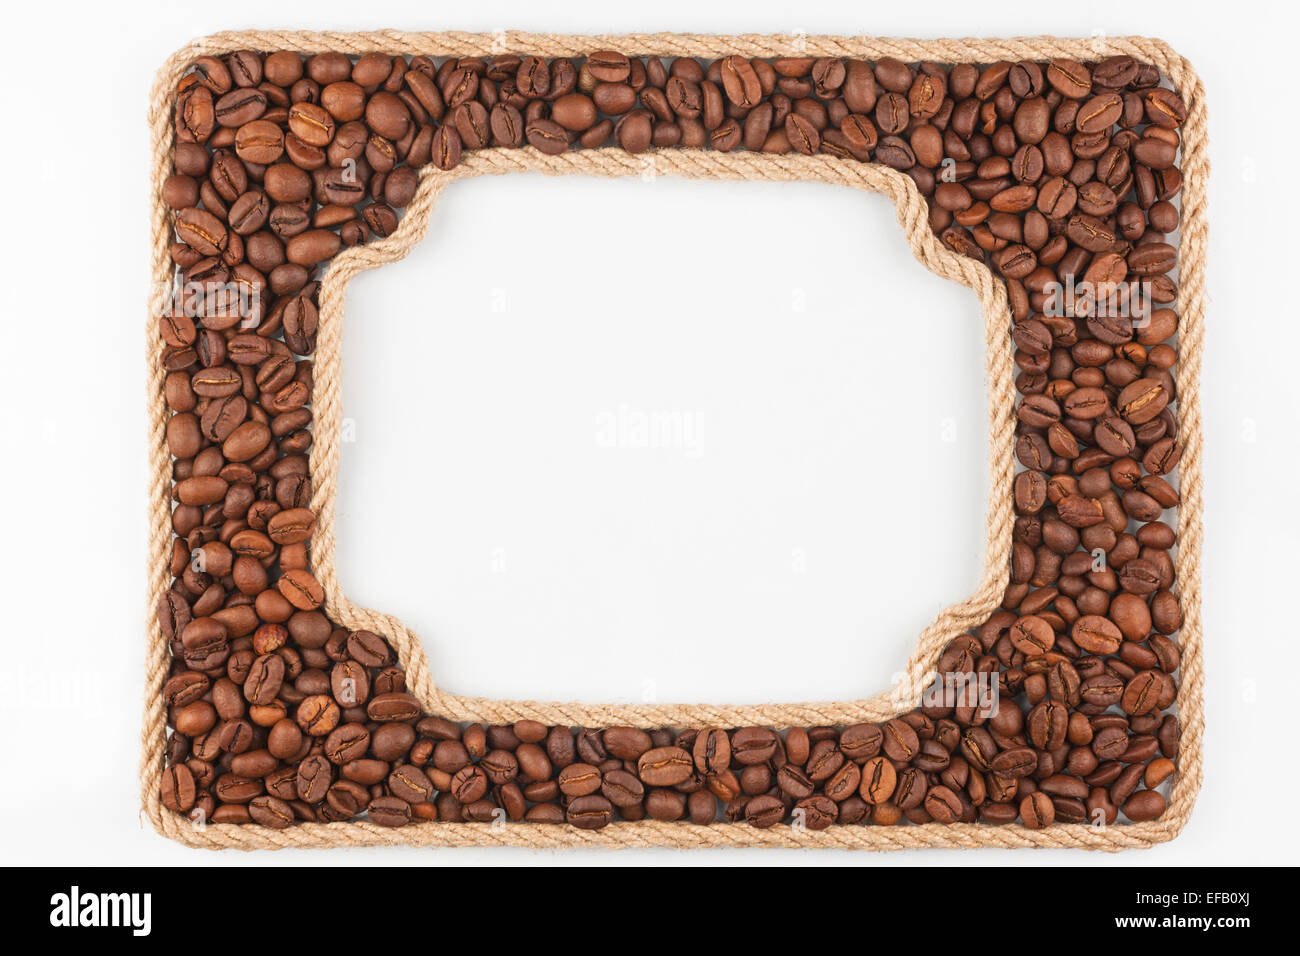 Two frames of the rope with coffee beans on a white background, with place for your text Stock Photo